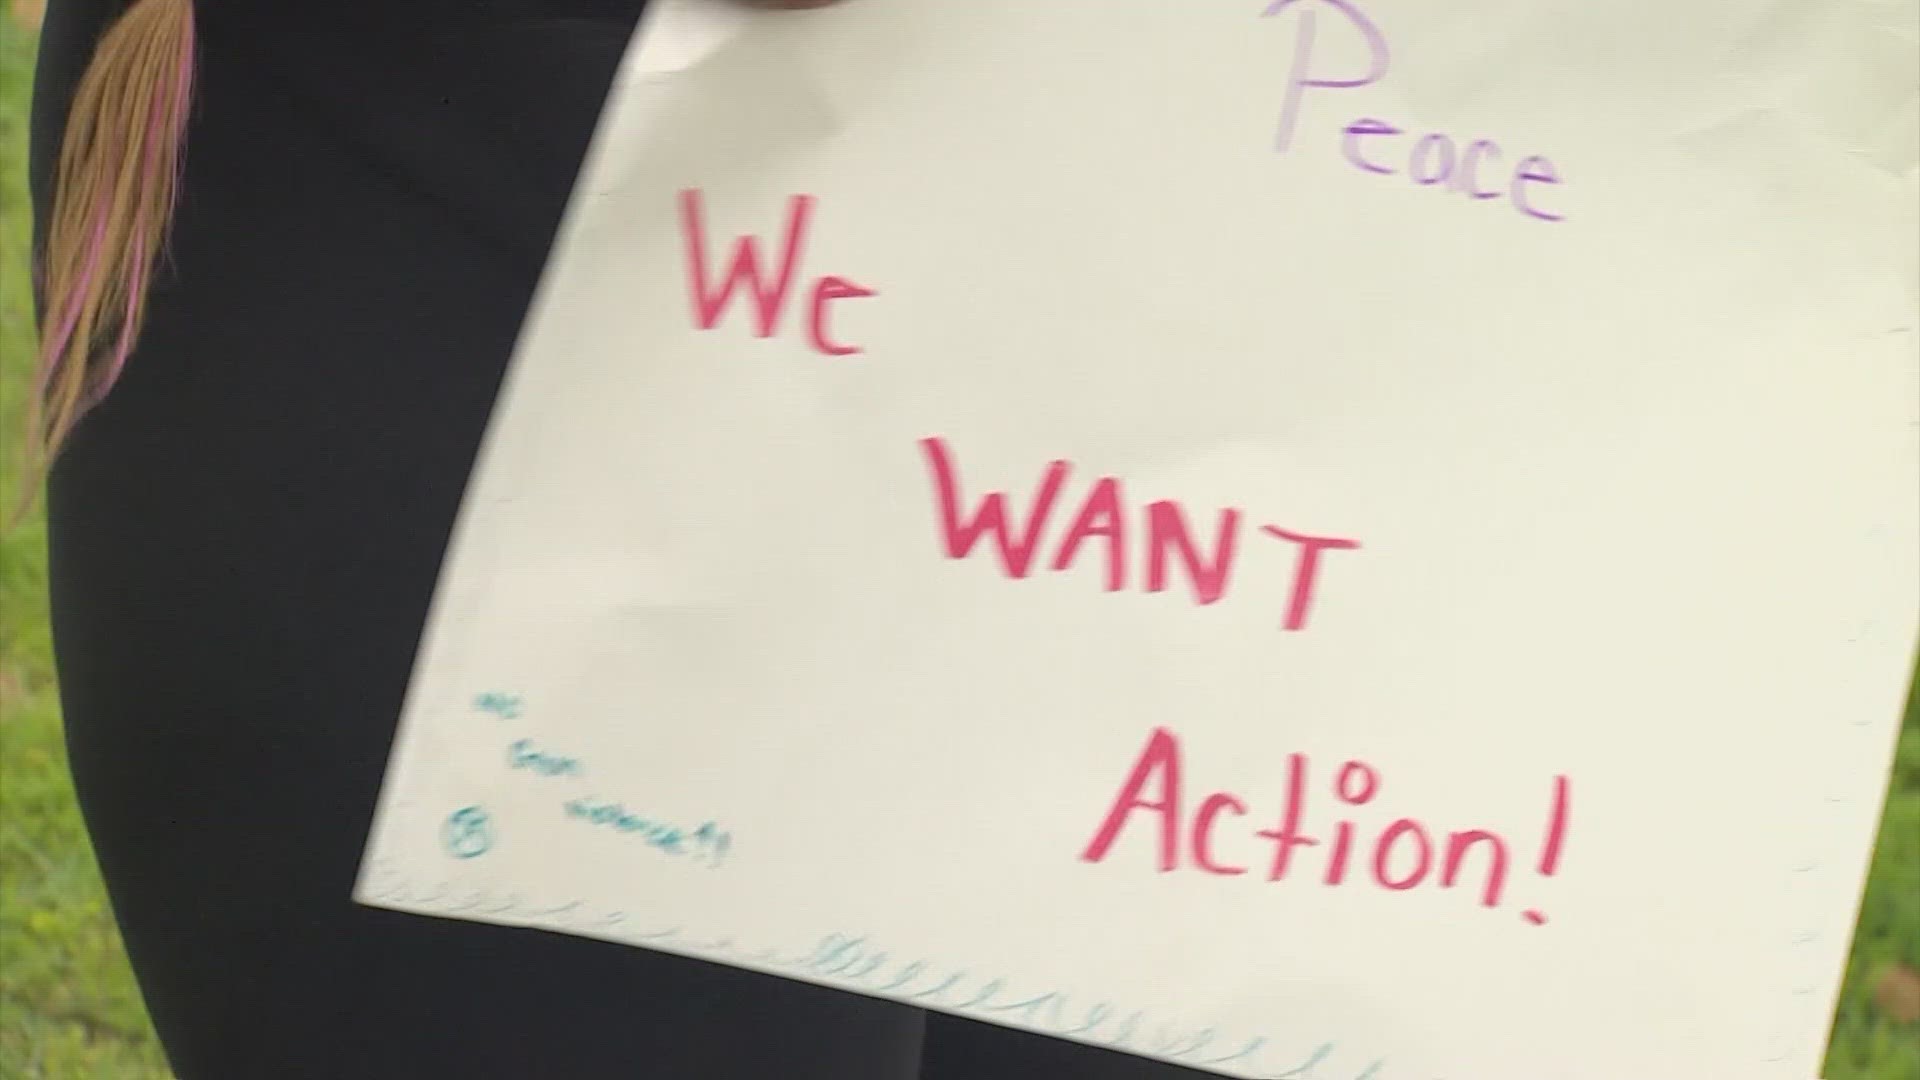 After the shooting at Wilmer-Hutchins HS, students, staff, and parents are raising questions about on-campus safety.